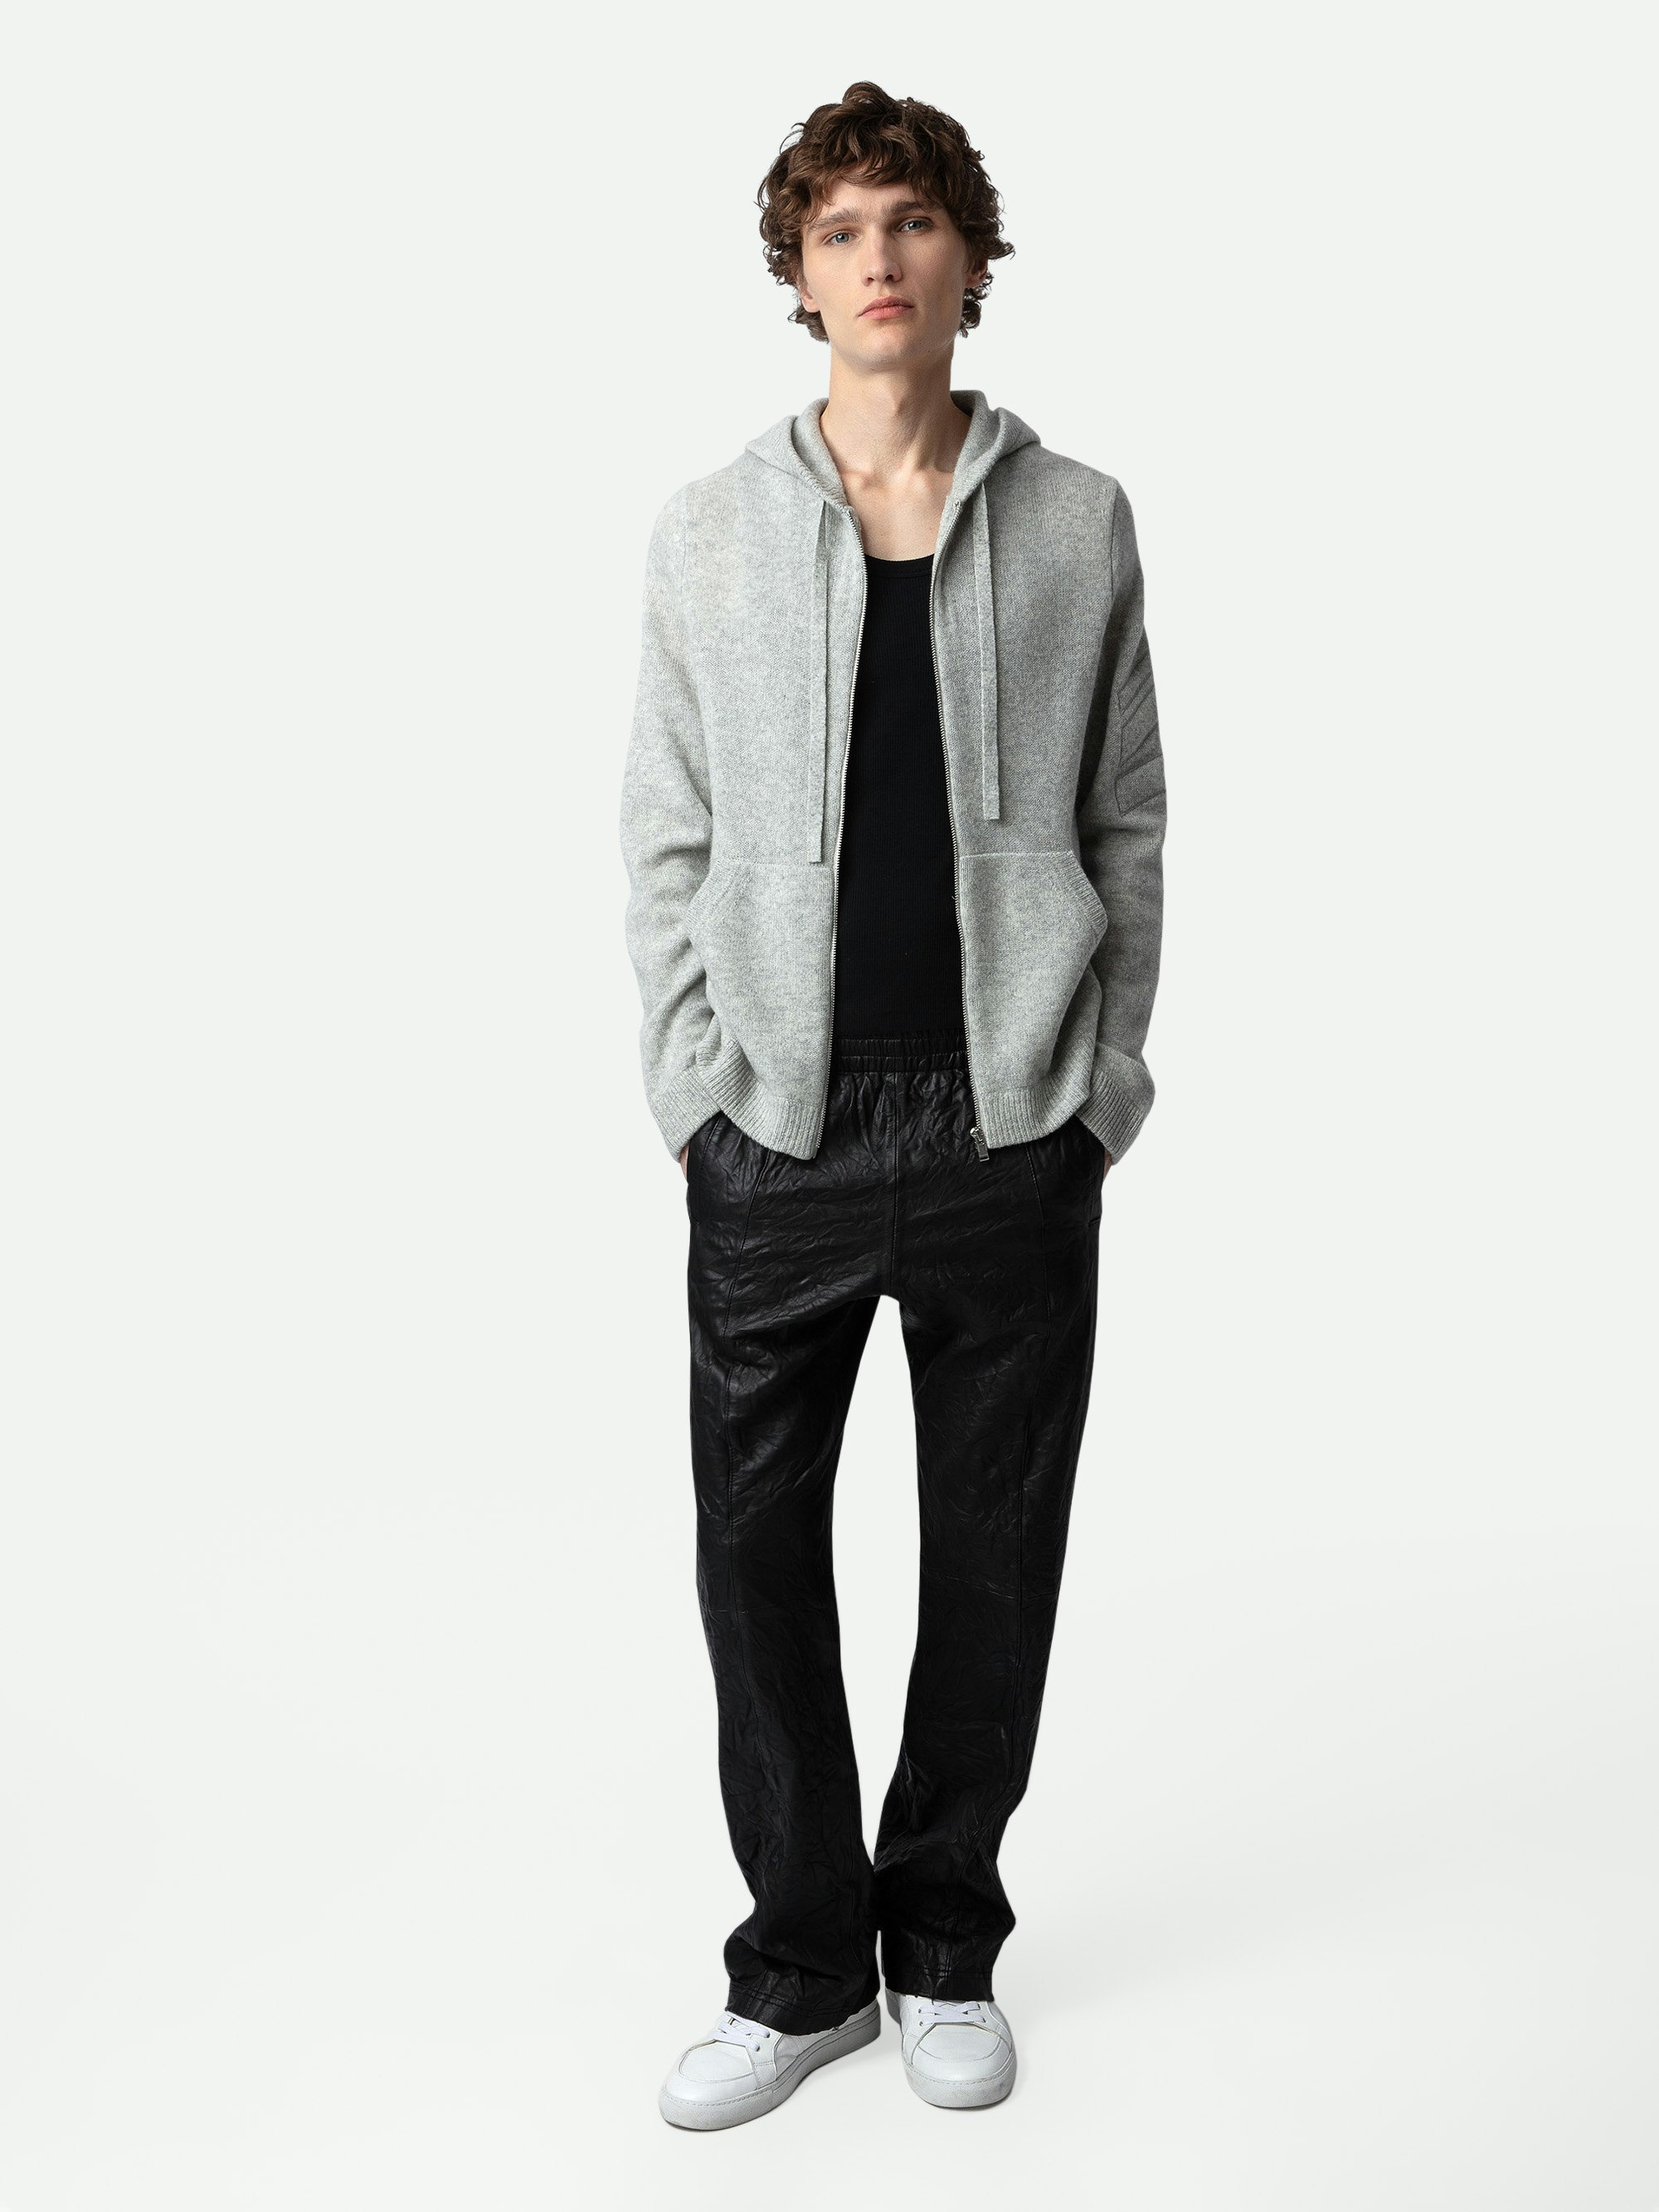 Clash Cardigan 100% Cashmere  - Grey 100% cashmere hooded zip-up cardigan with arrows on the left sleeve.